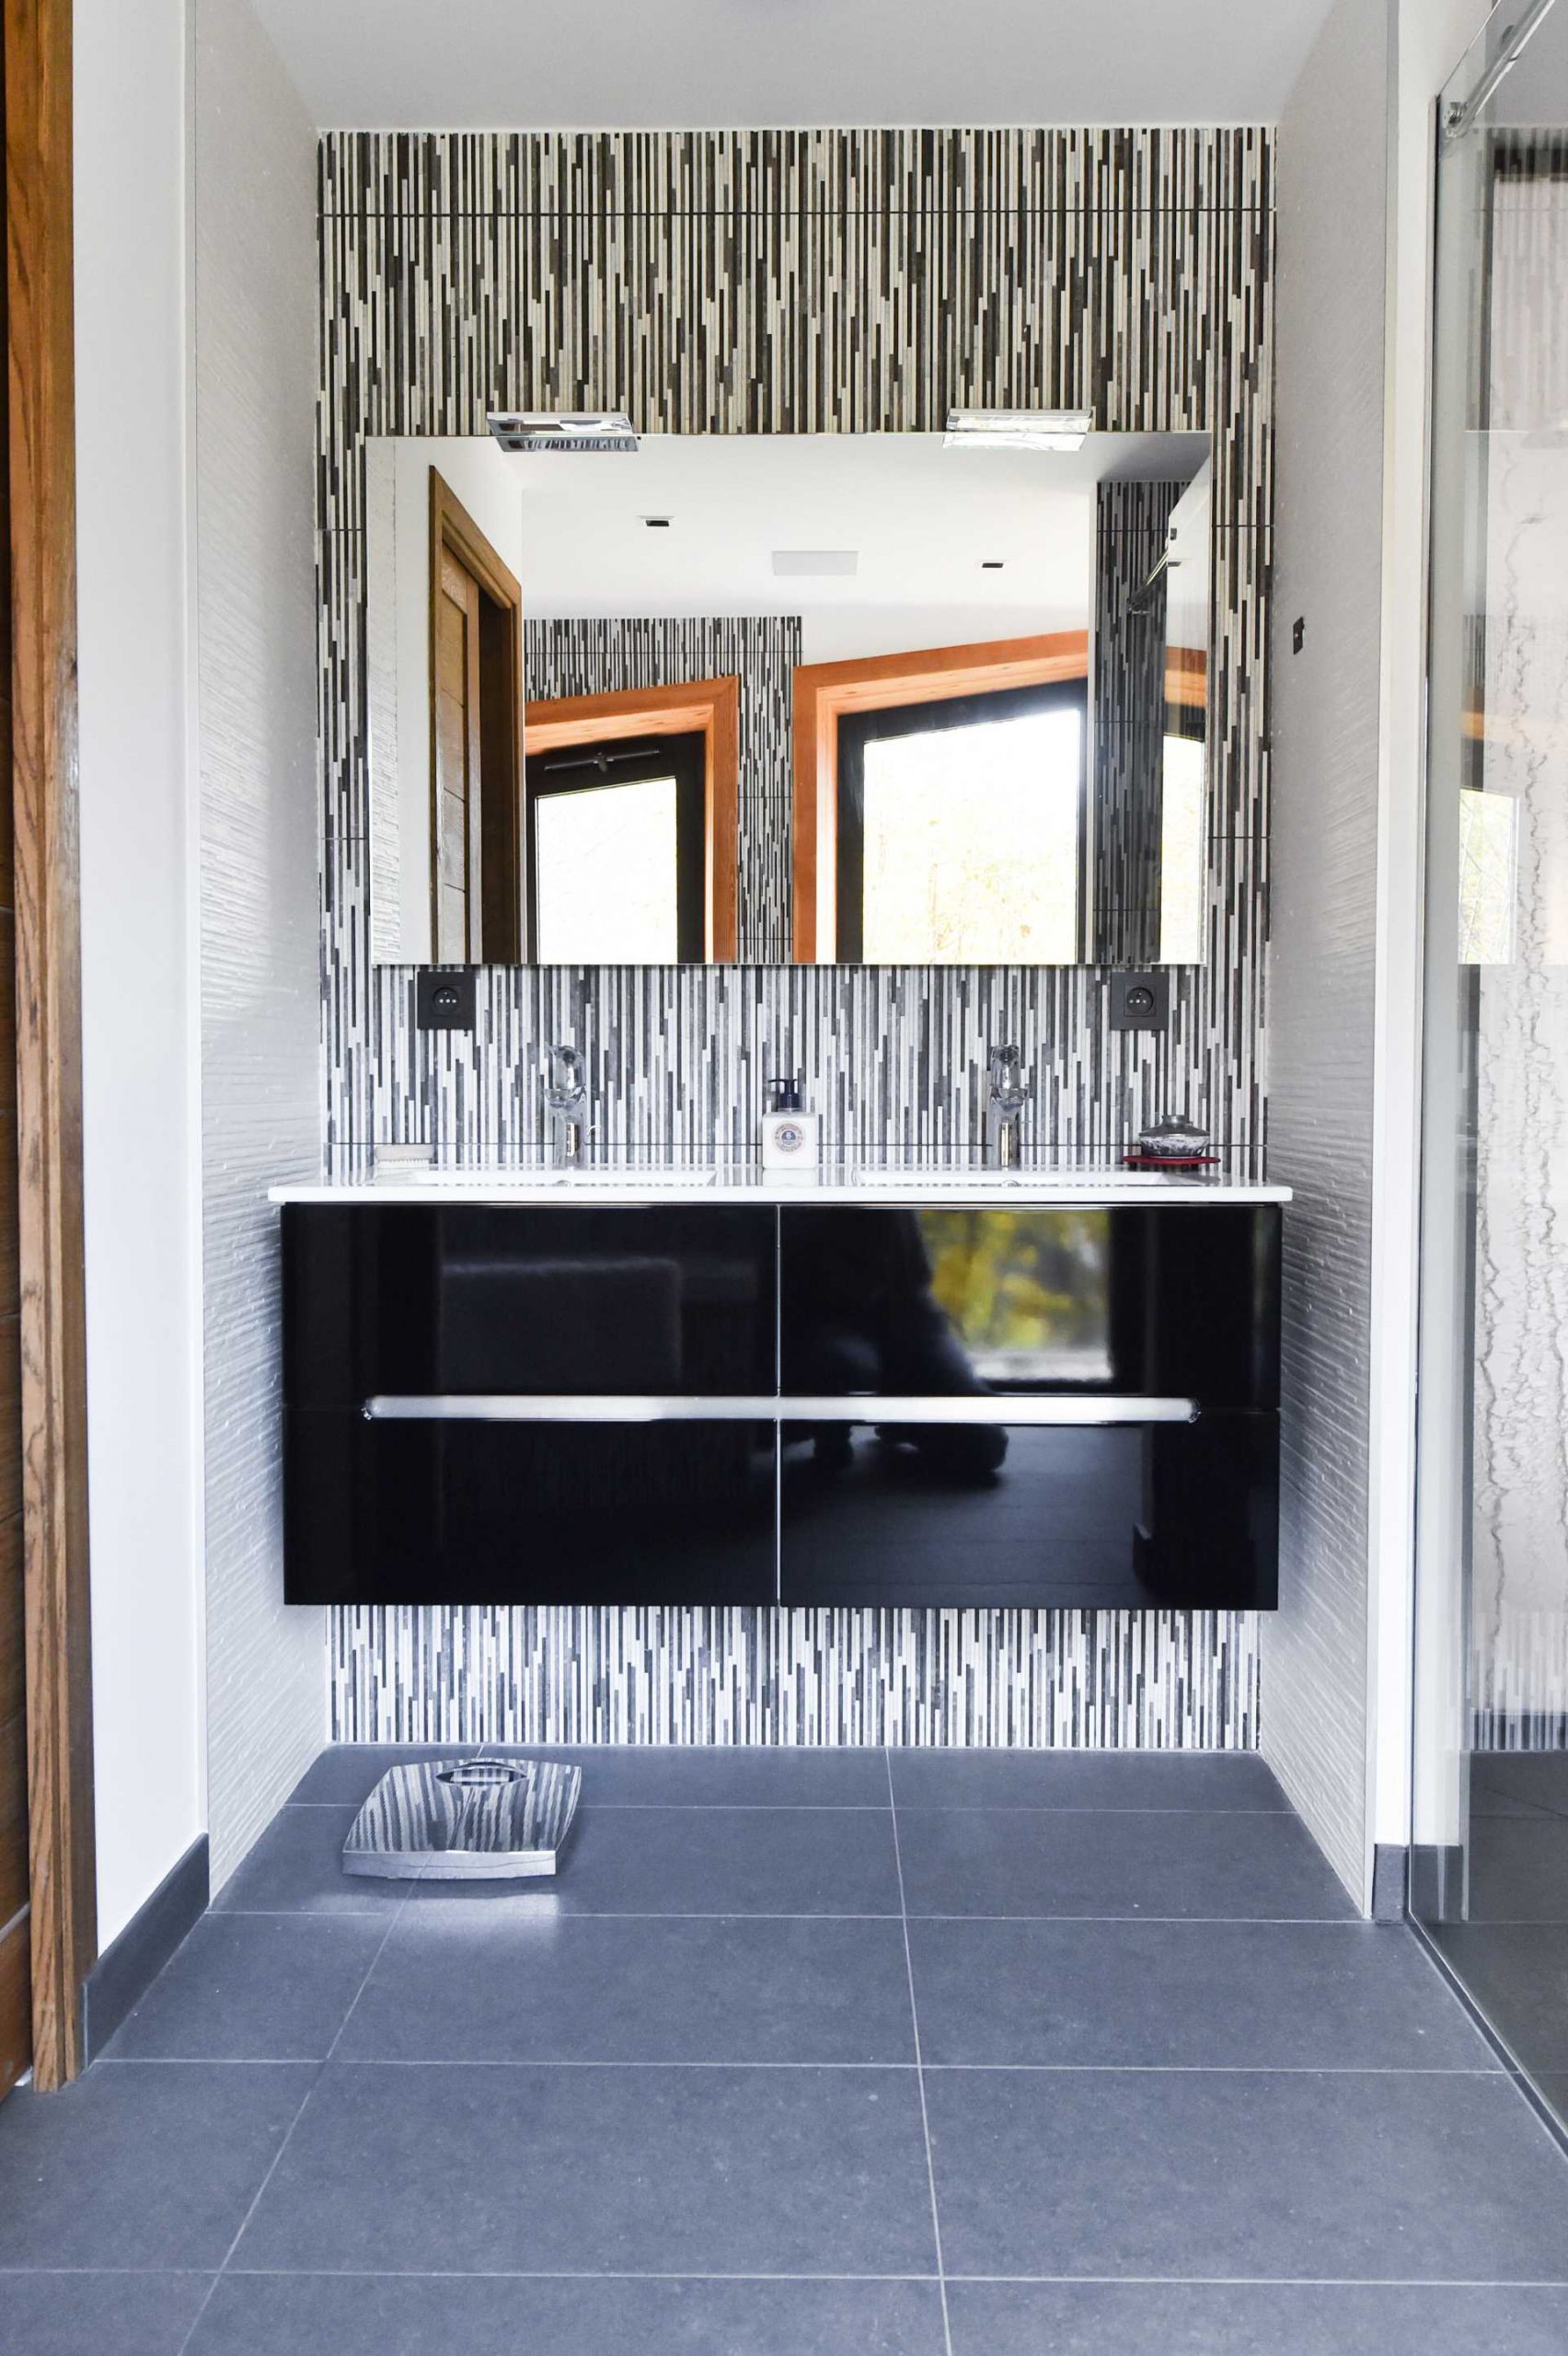 A modern bathroom with an accent wall that has a vertical design.